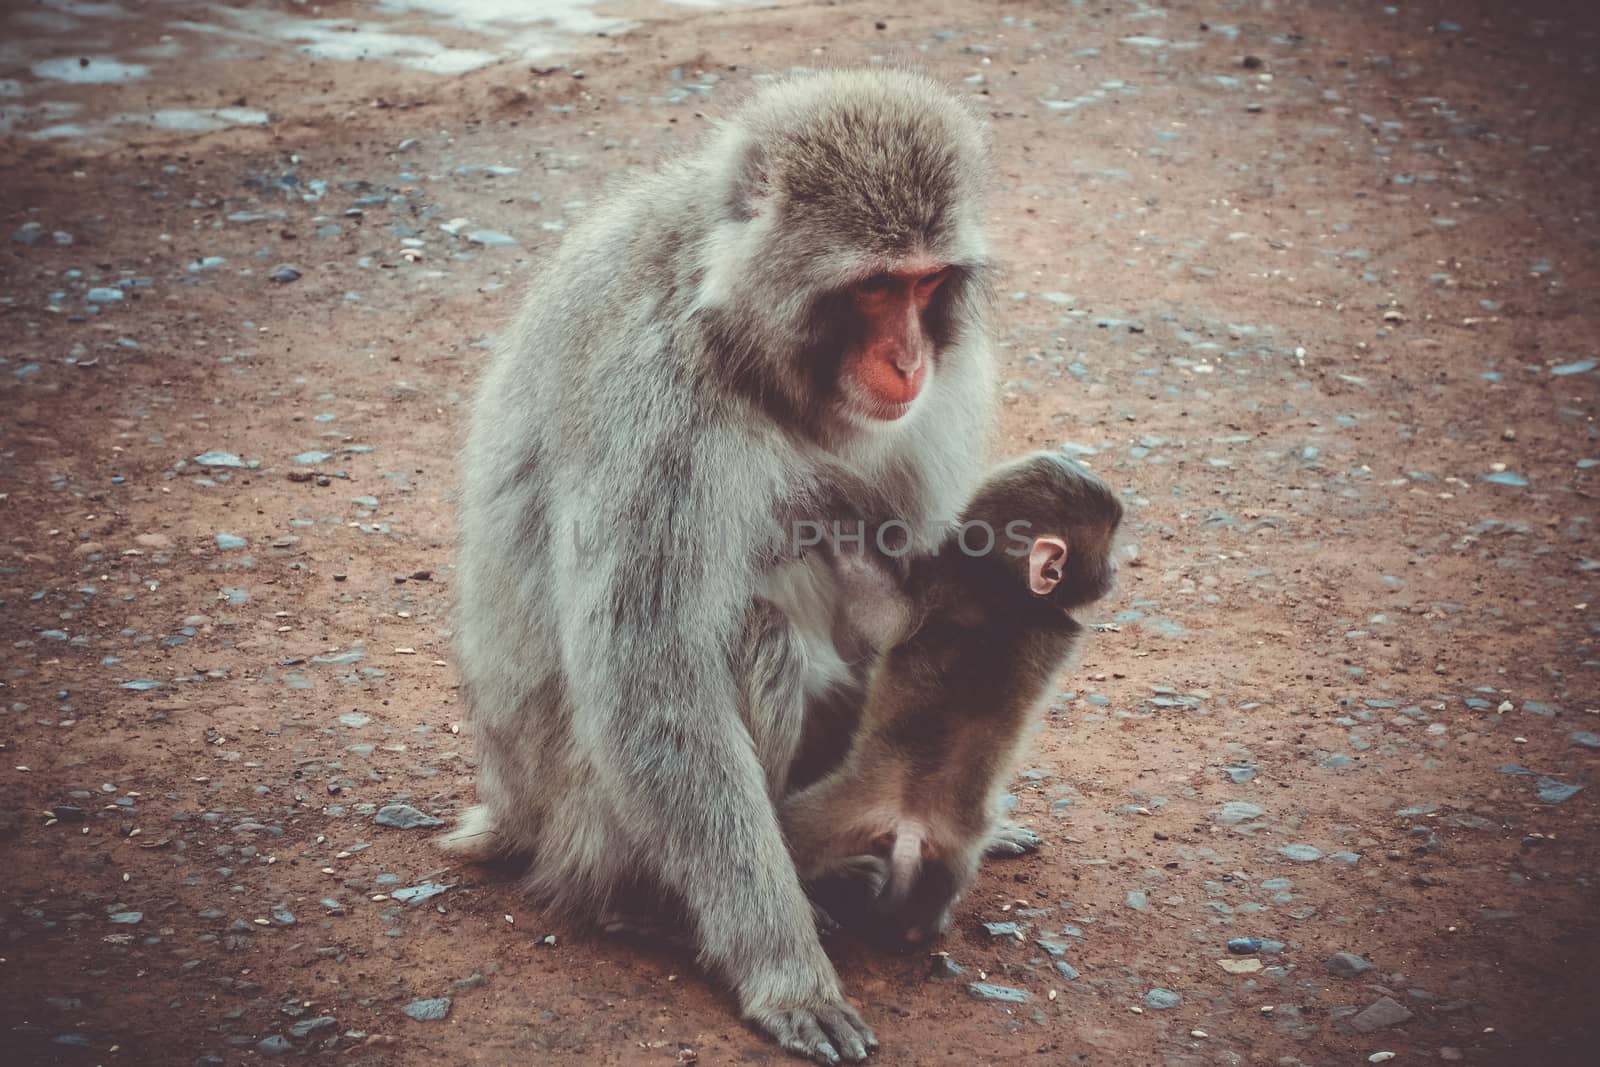 Japanese macaque and baby, Iwatayama monkey park, Kyoto, Japan by daboost